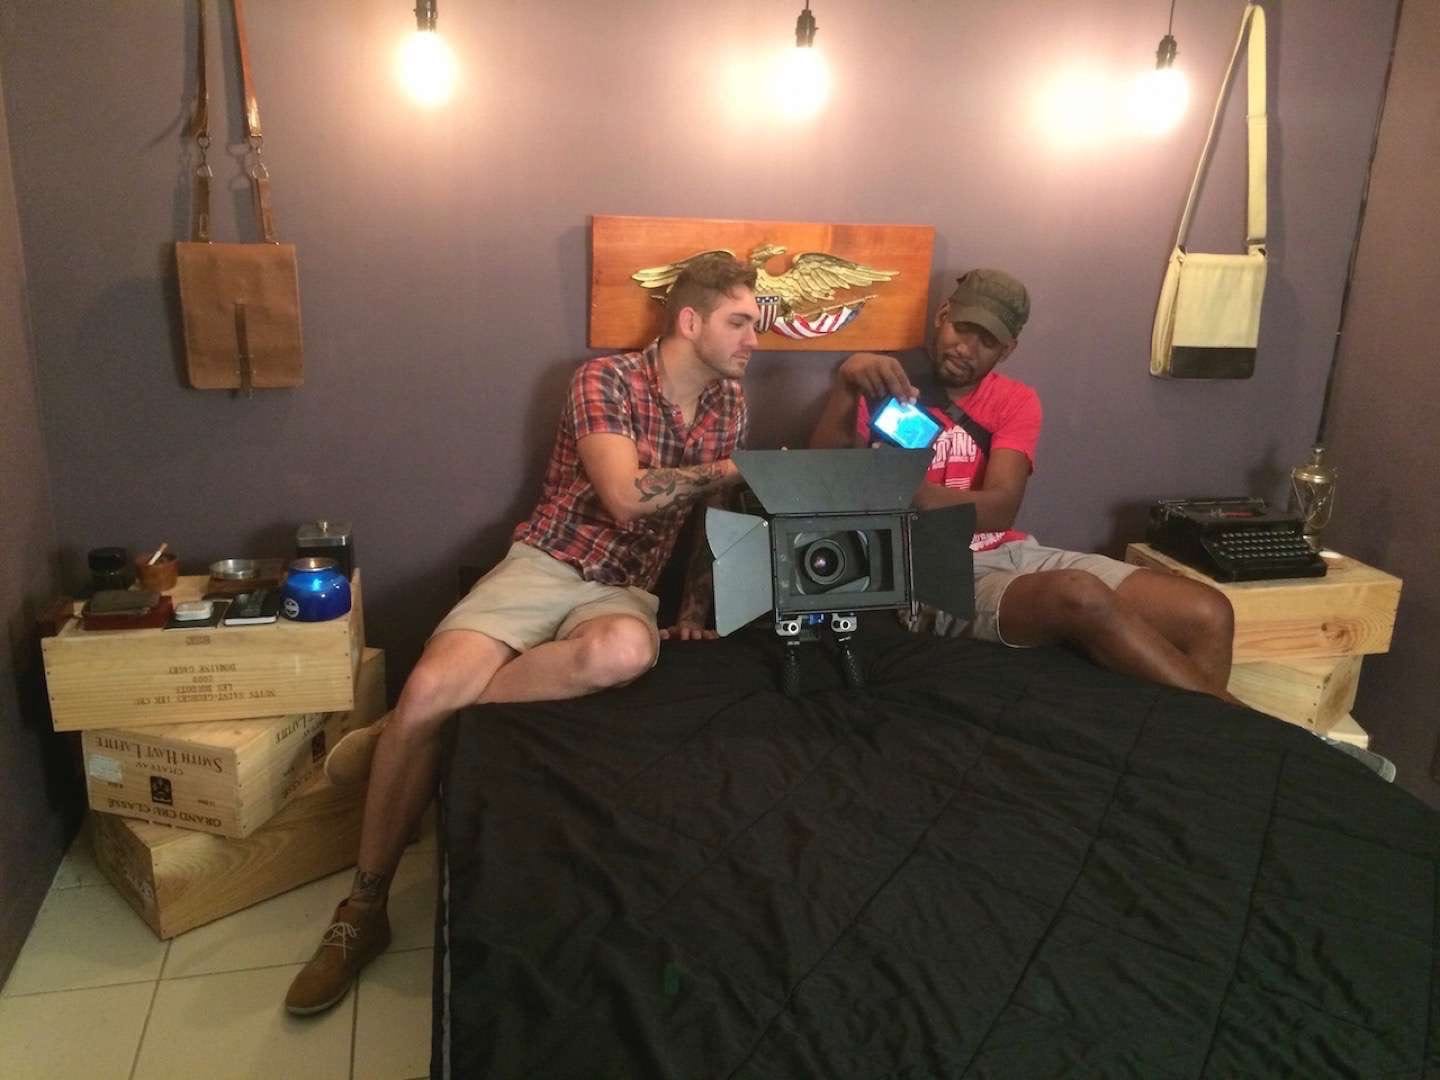 Two male film crew on a bed adjusting video equipment